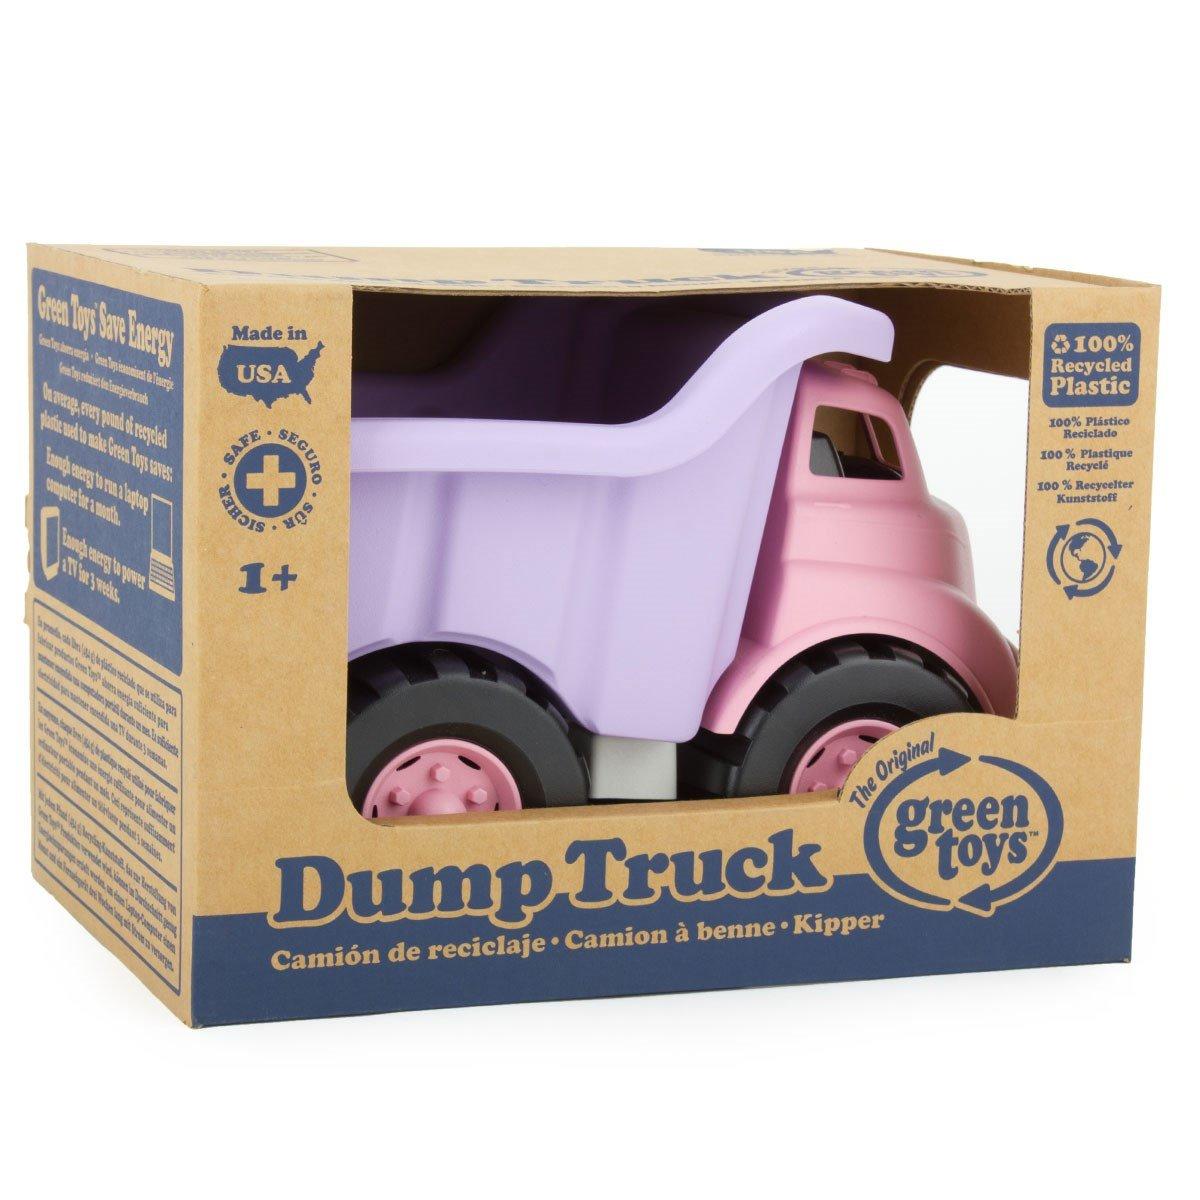 Green Toys Dump Truck Pink Toy Gift 100 Recycled Plastic Dishwasher Safe for sale online 